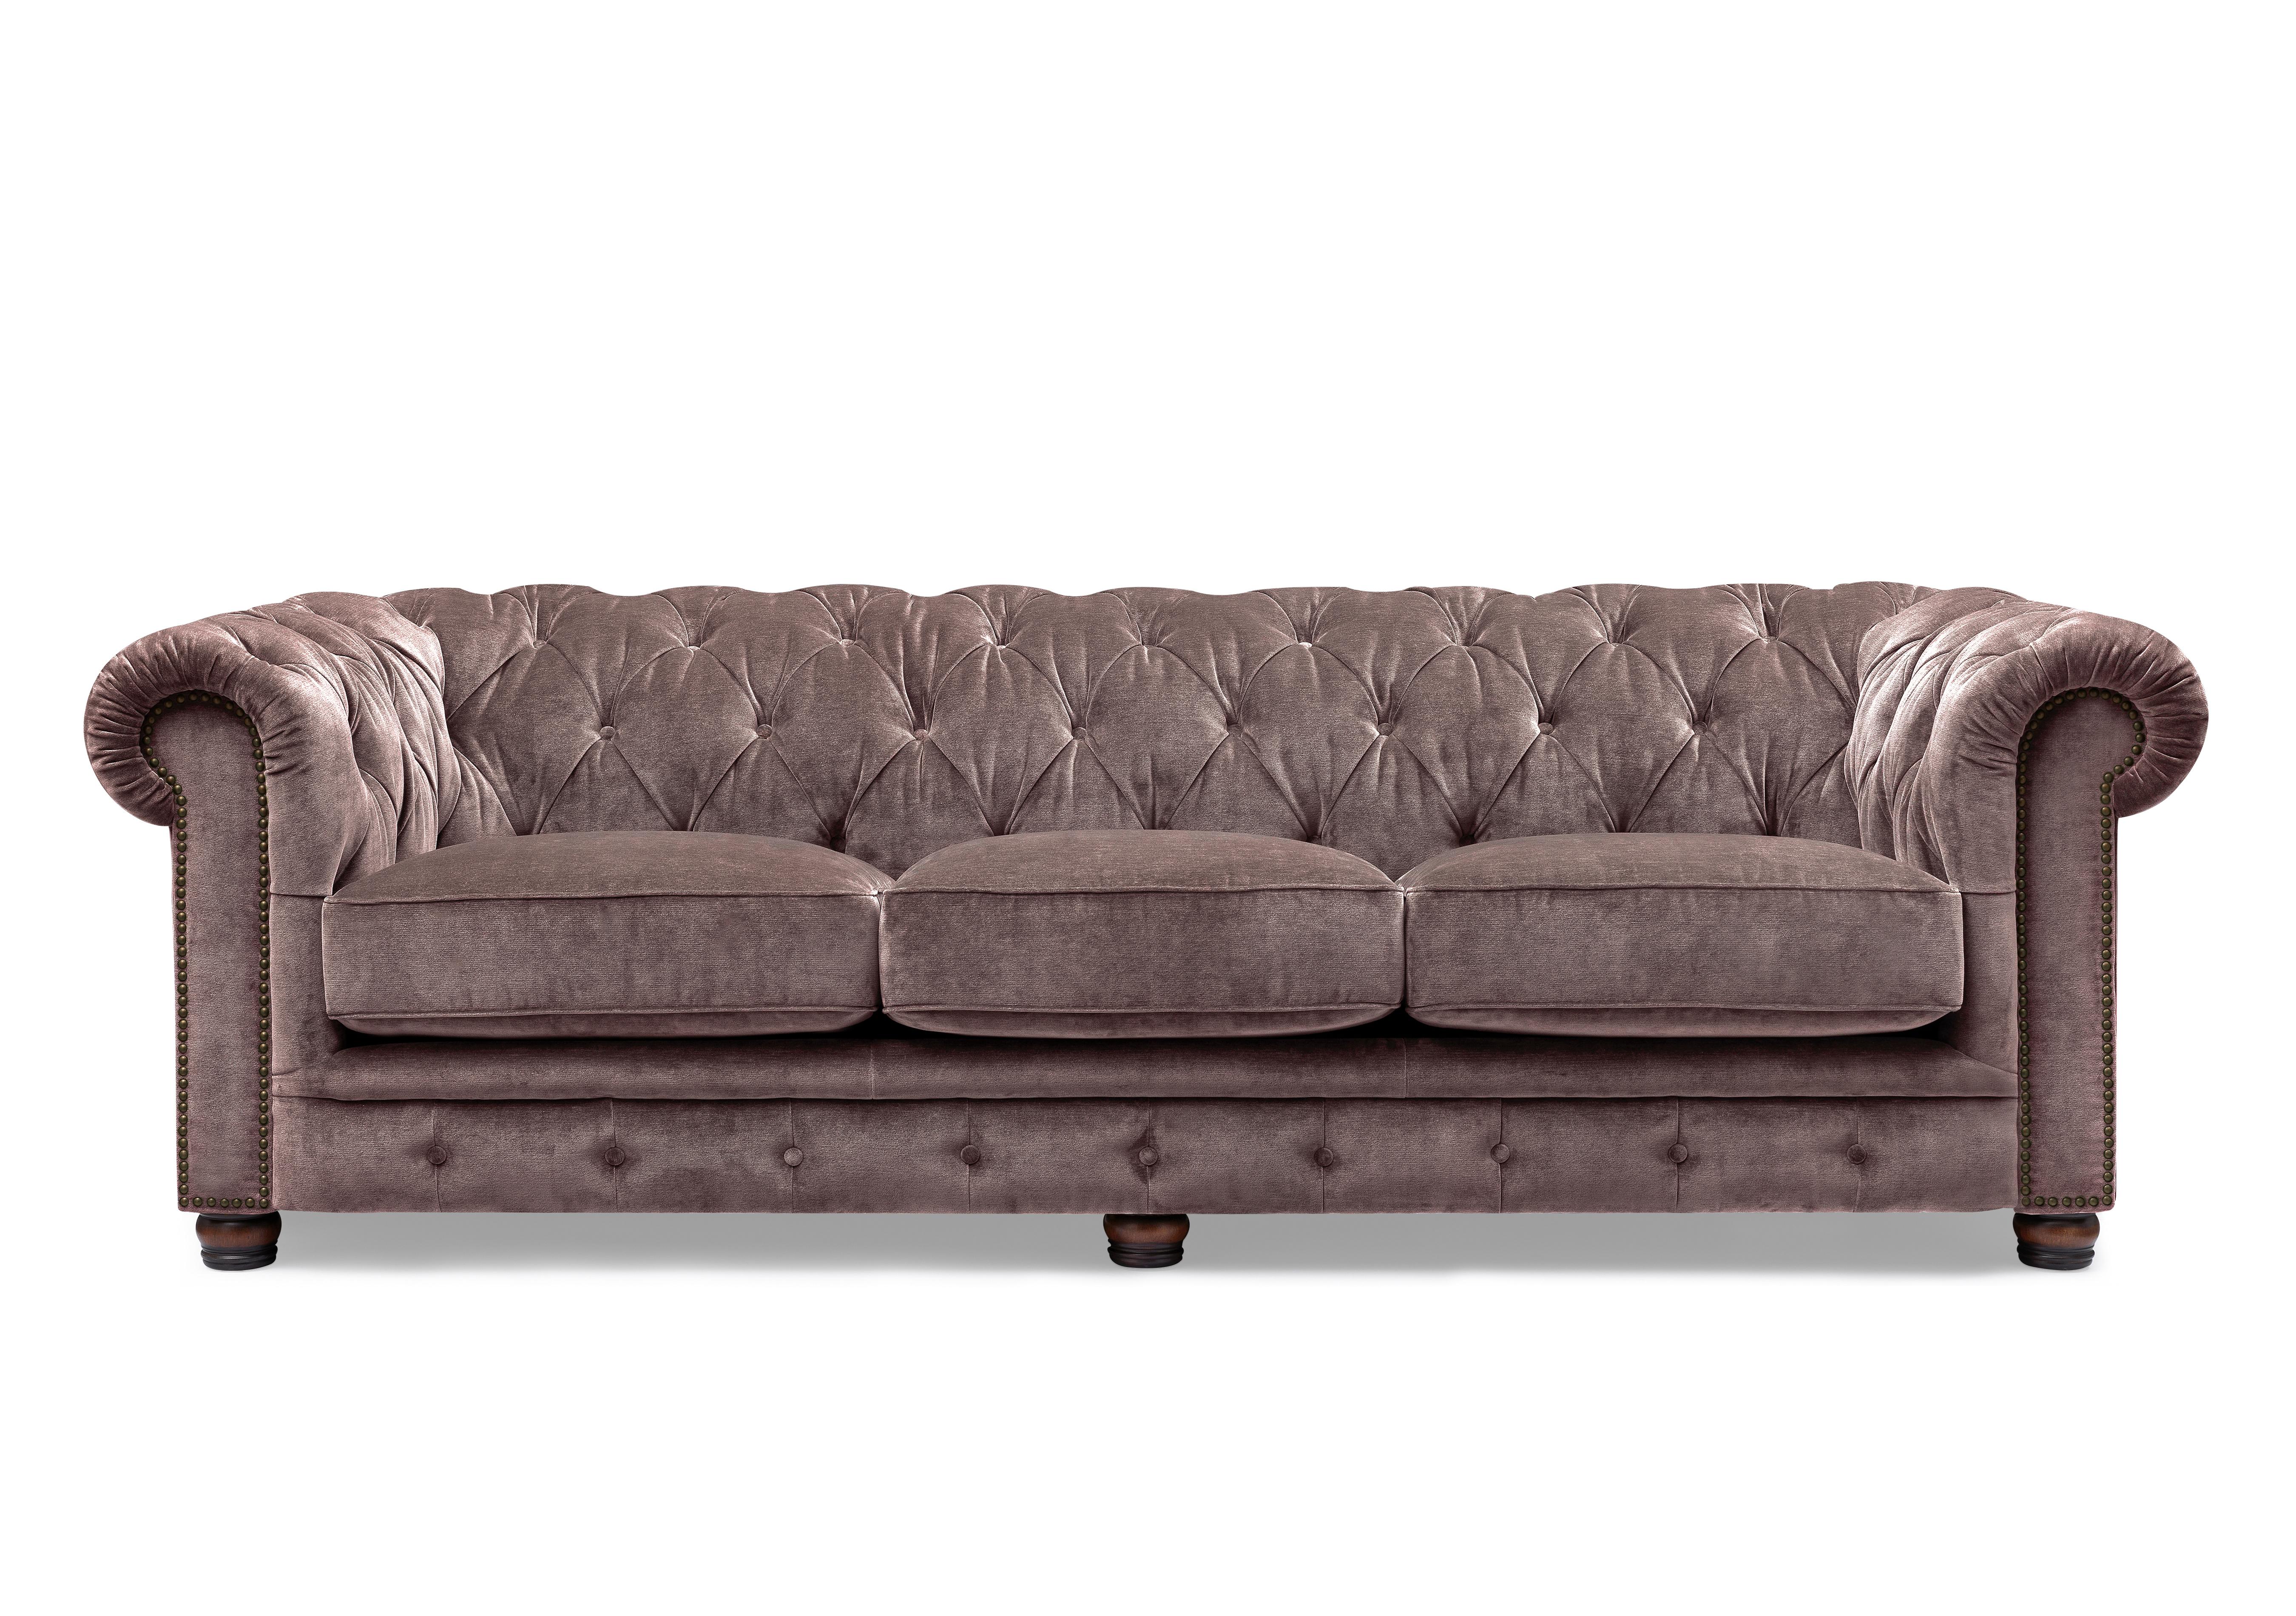 Shackleton 4 Seater Fabric Chesterfield Sofa with USB-C in X3y1-W023 Antler on Furniture Village